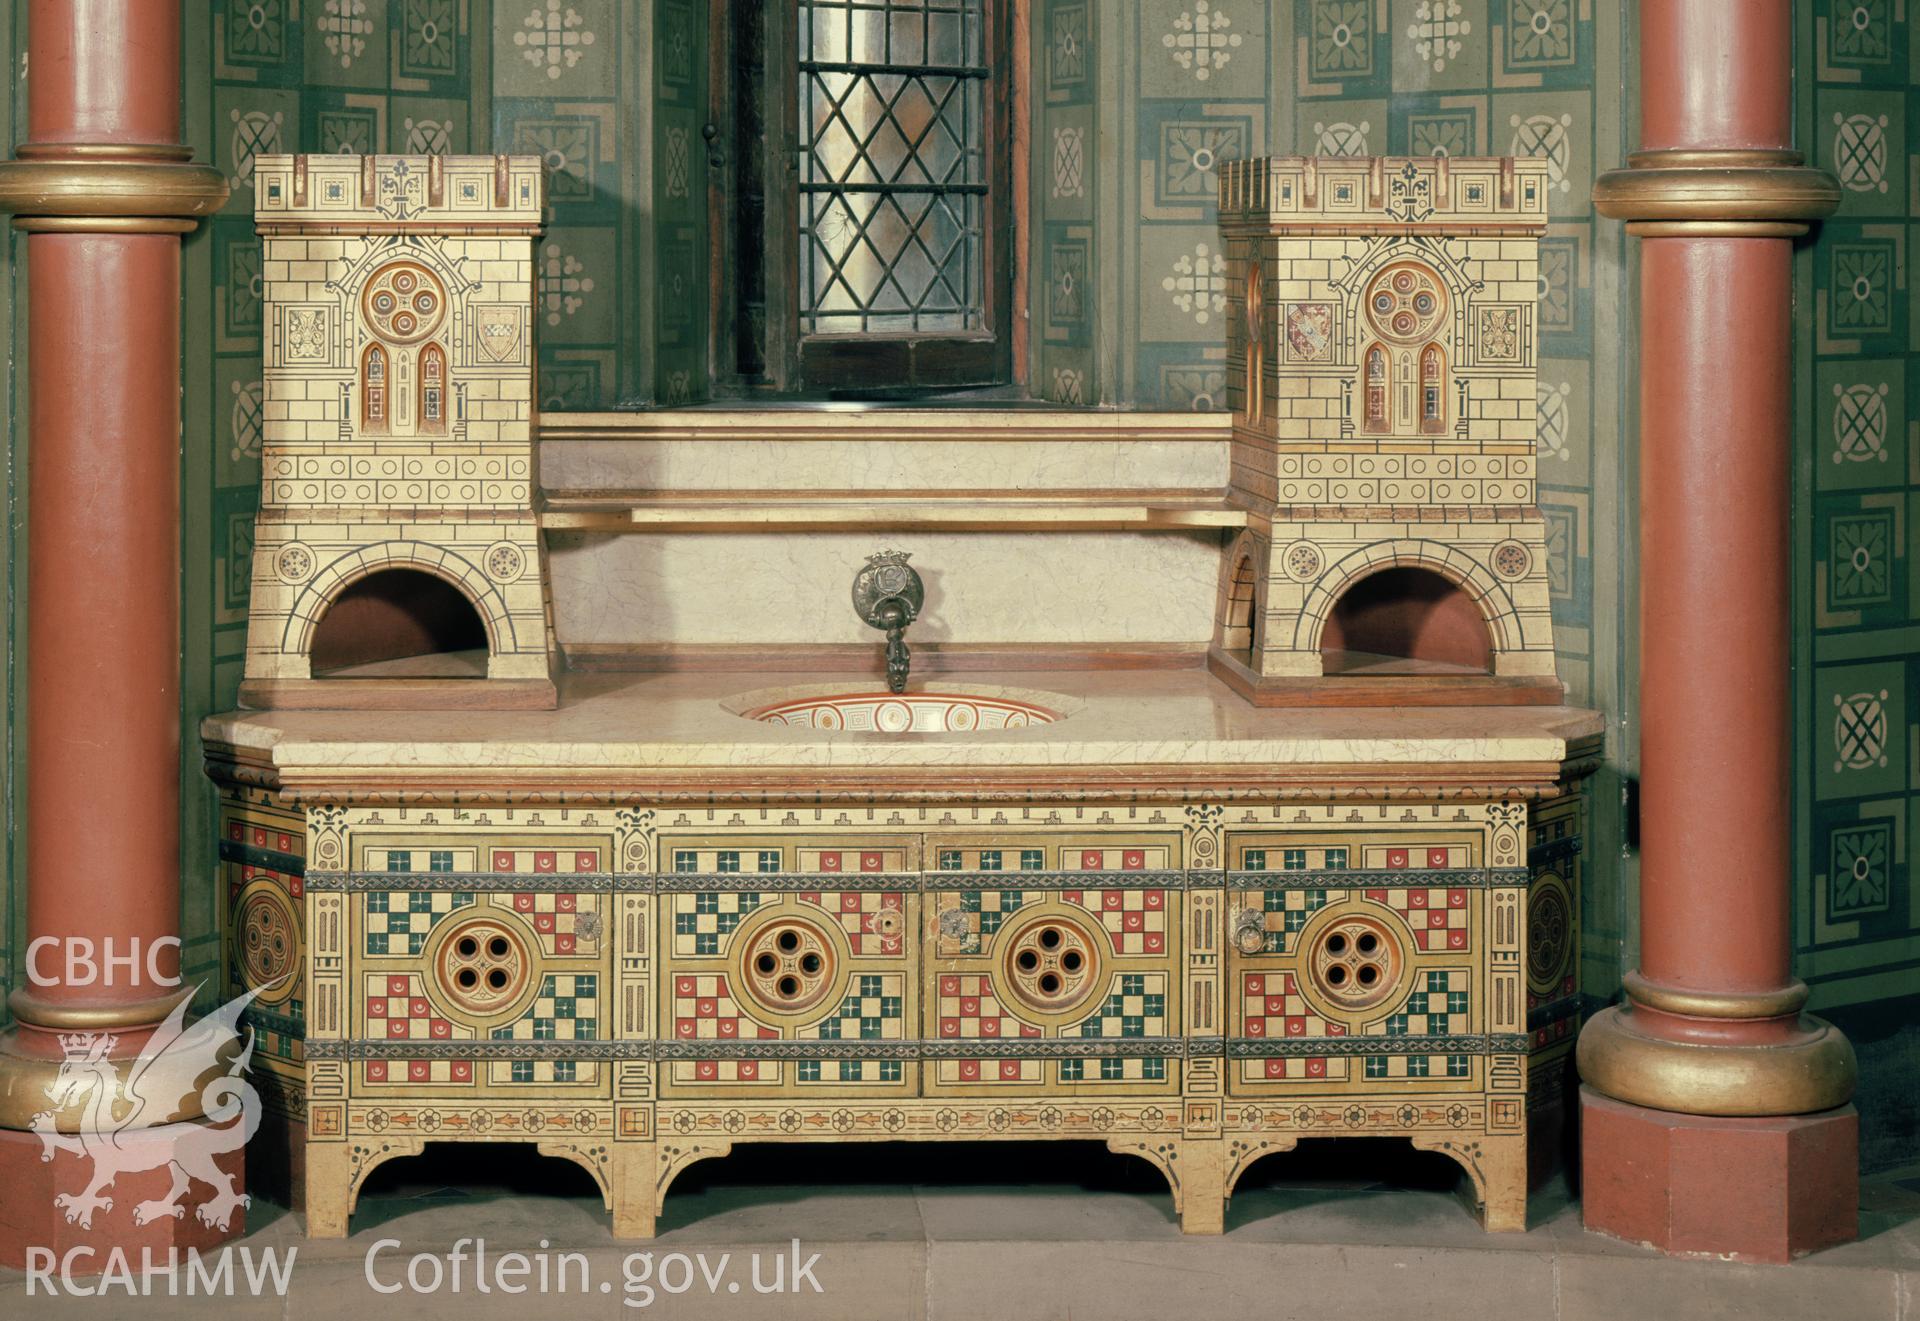 Interior view of Castell Coch showing washstand in Lady's Chamber, taken in 1975.